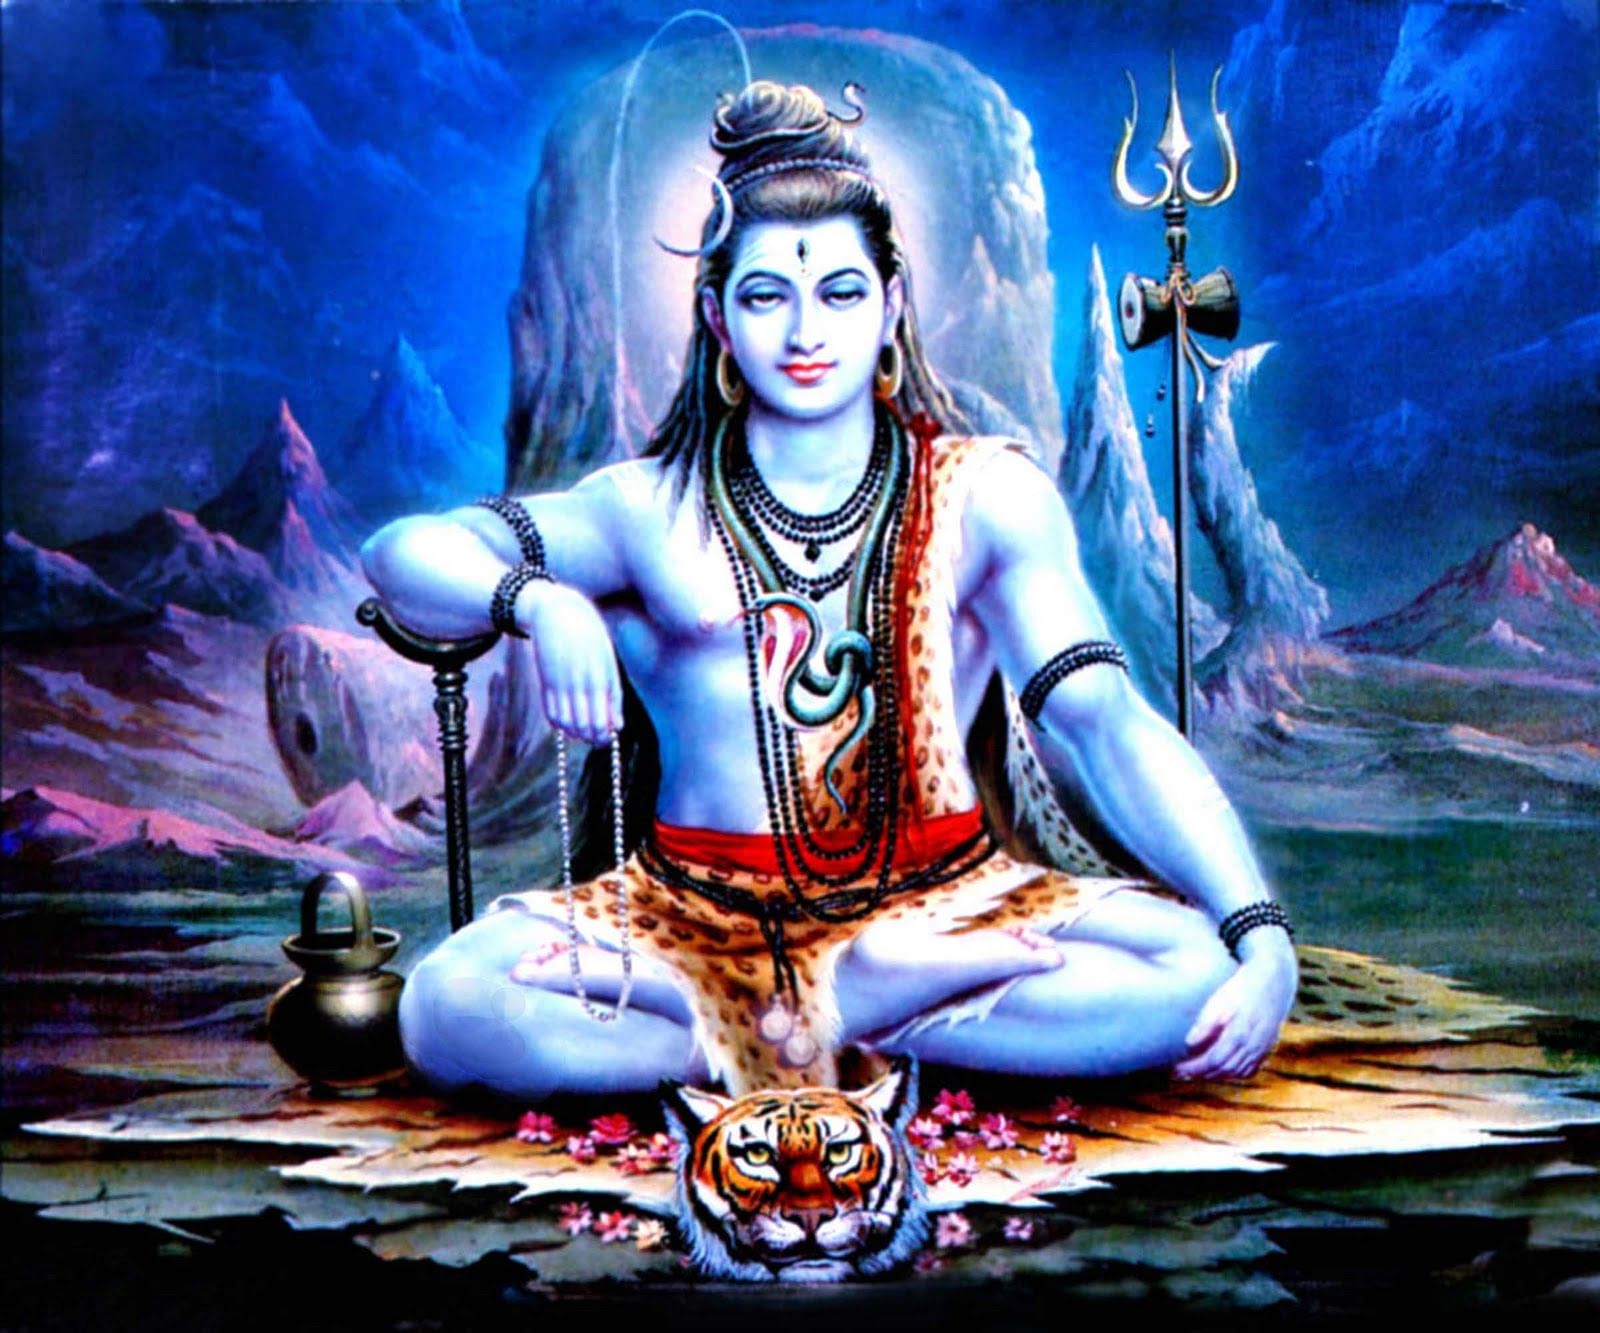 Remedies to please Lord Shiva